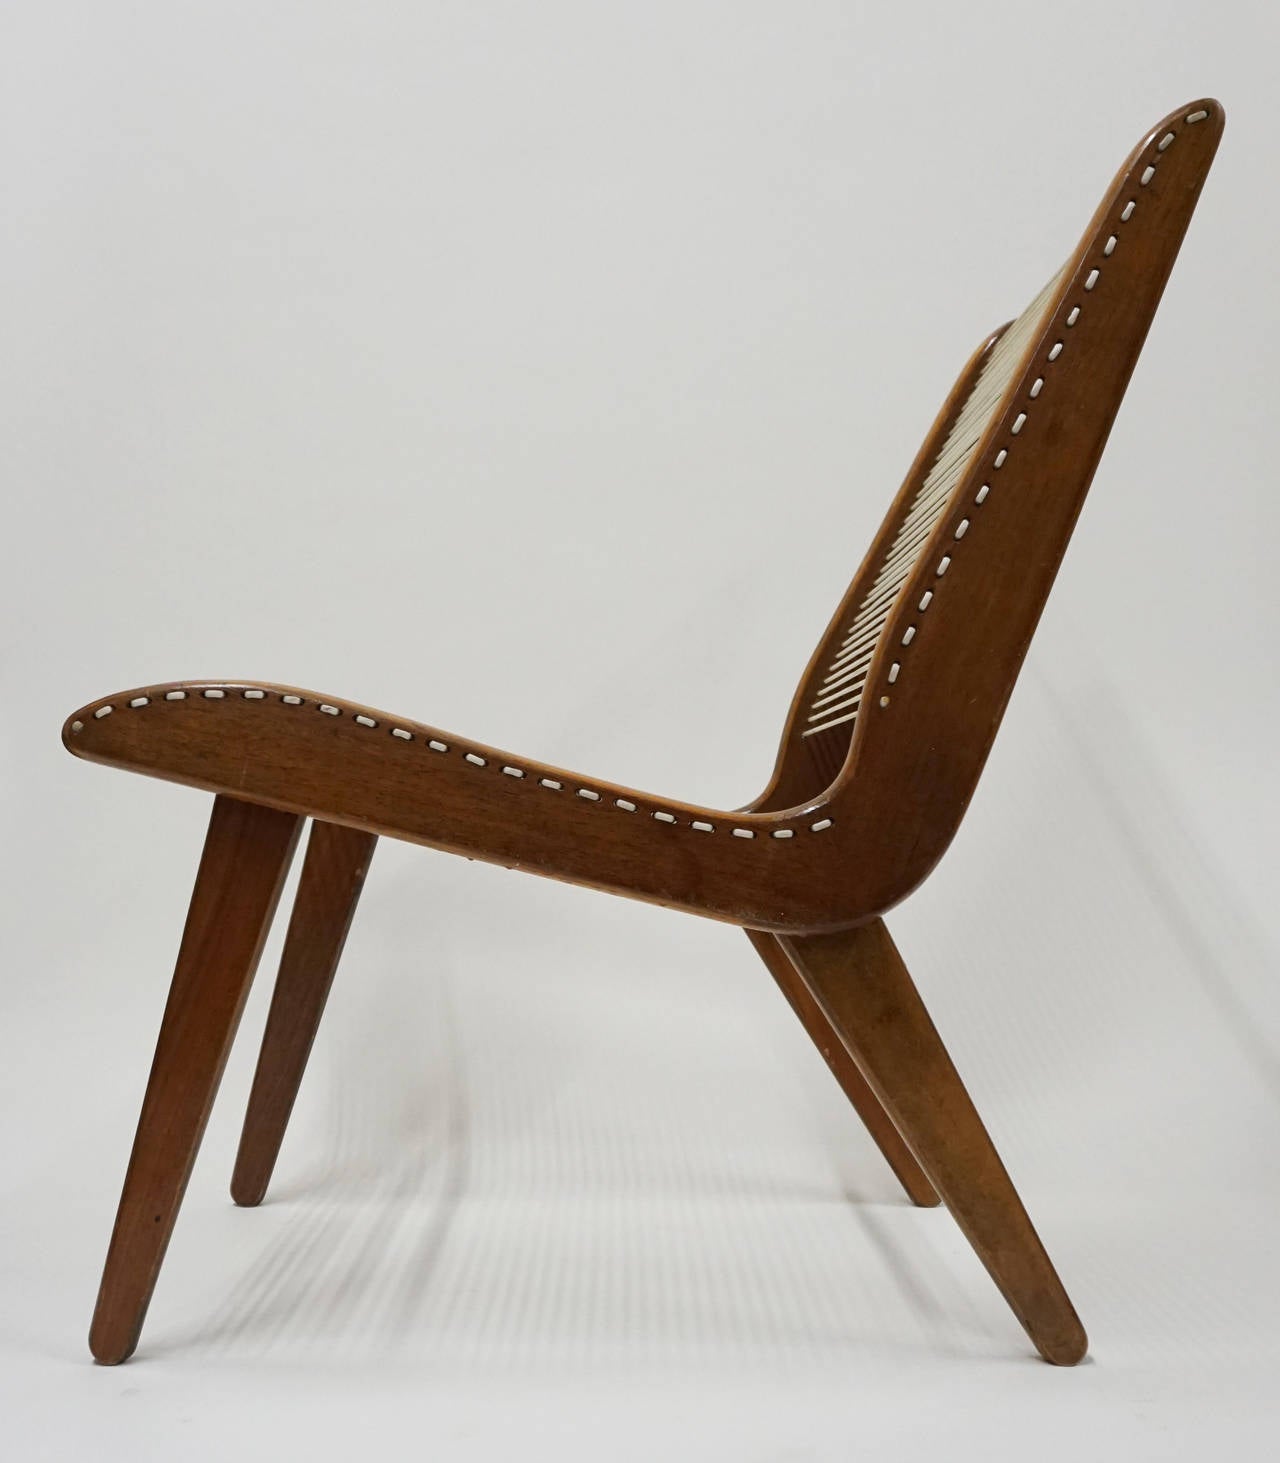 Modernist string chair by Carl Koch for Tubbs of Vermont. Great Minimalist design by the Bostson architect. Simple wood frame, nylon cord and iron supports.